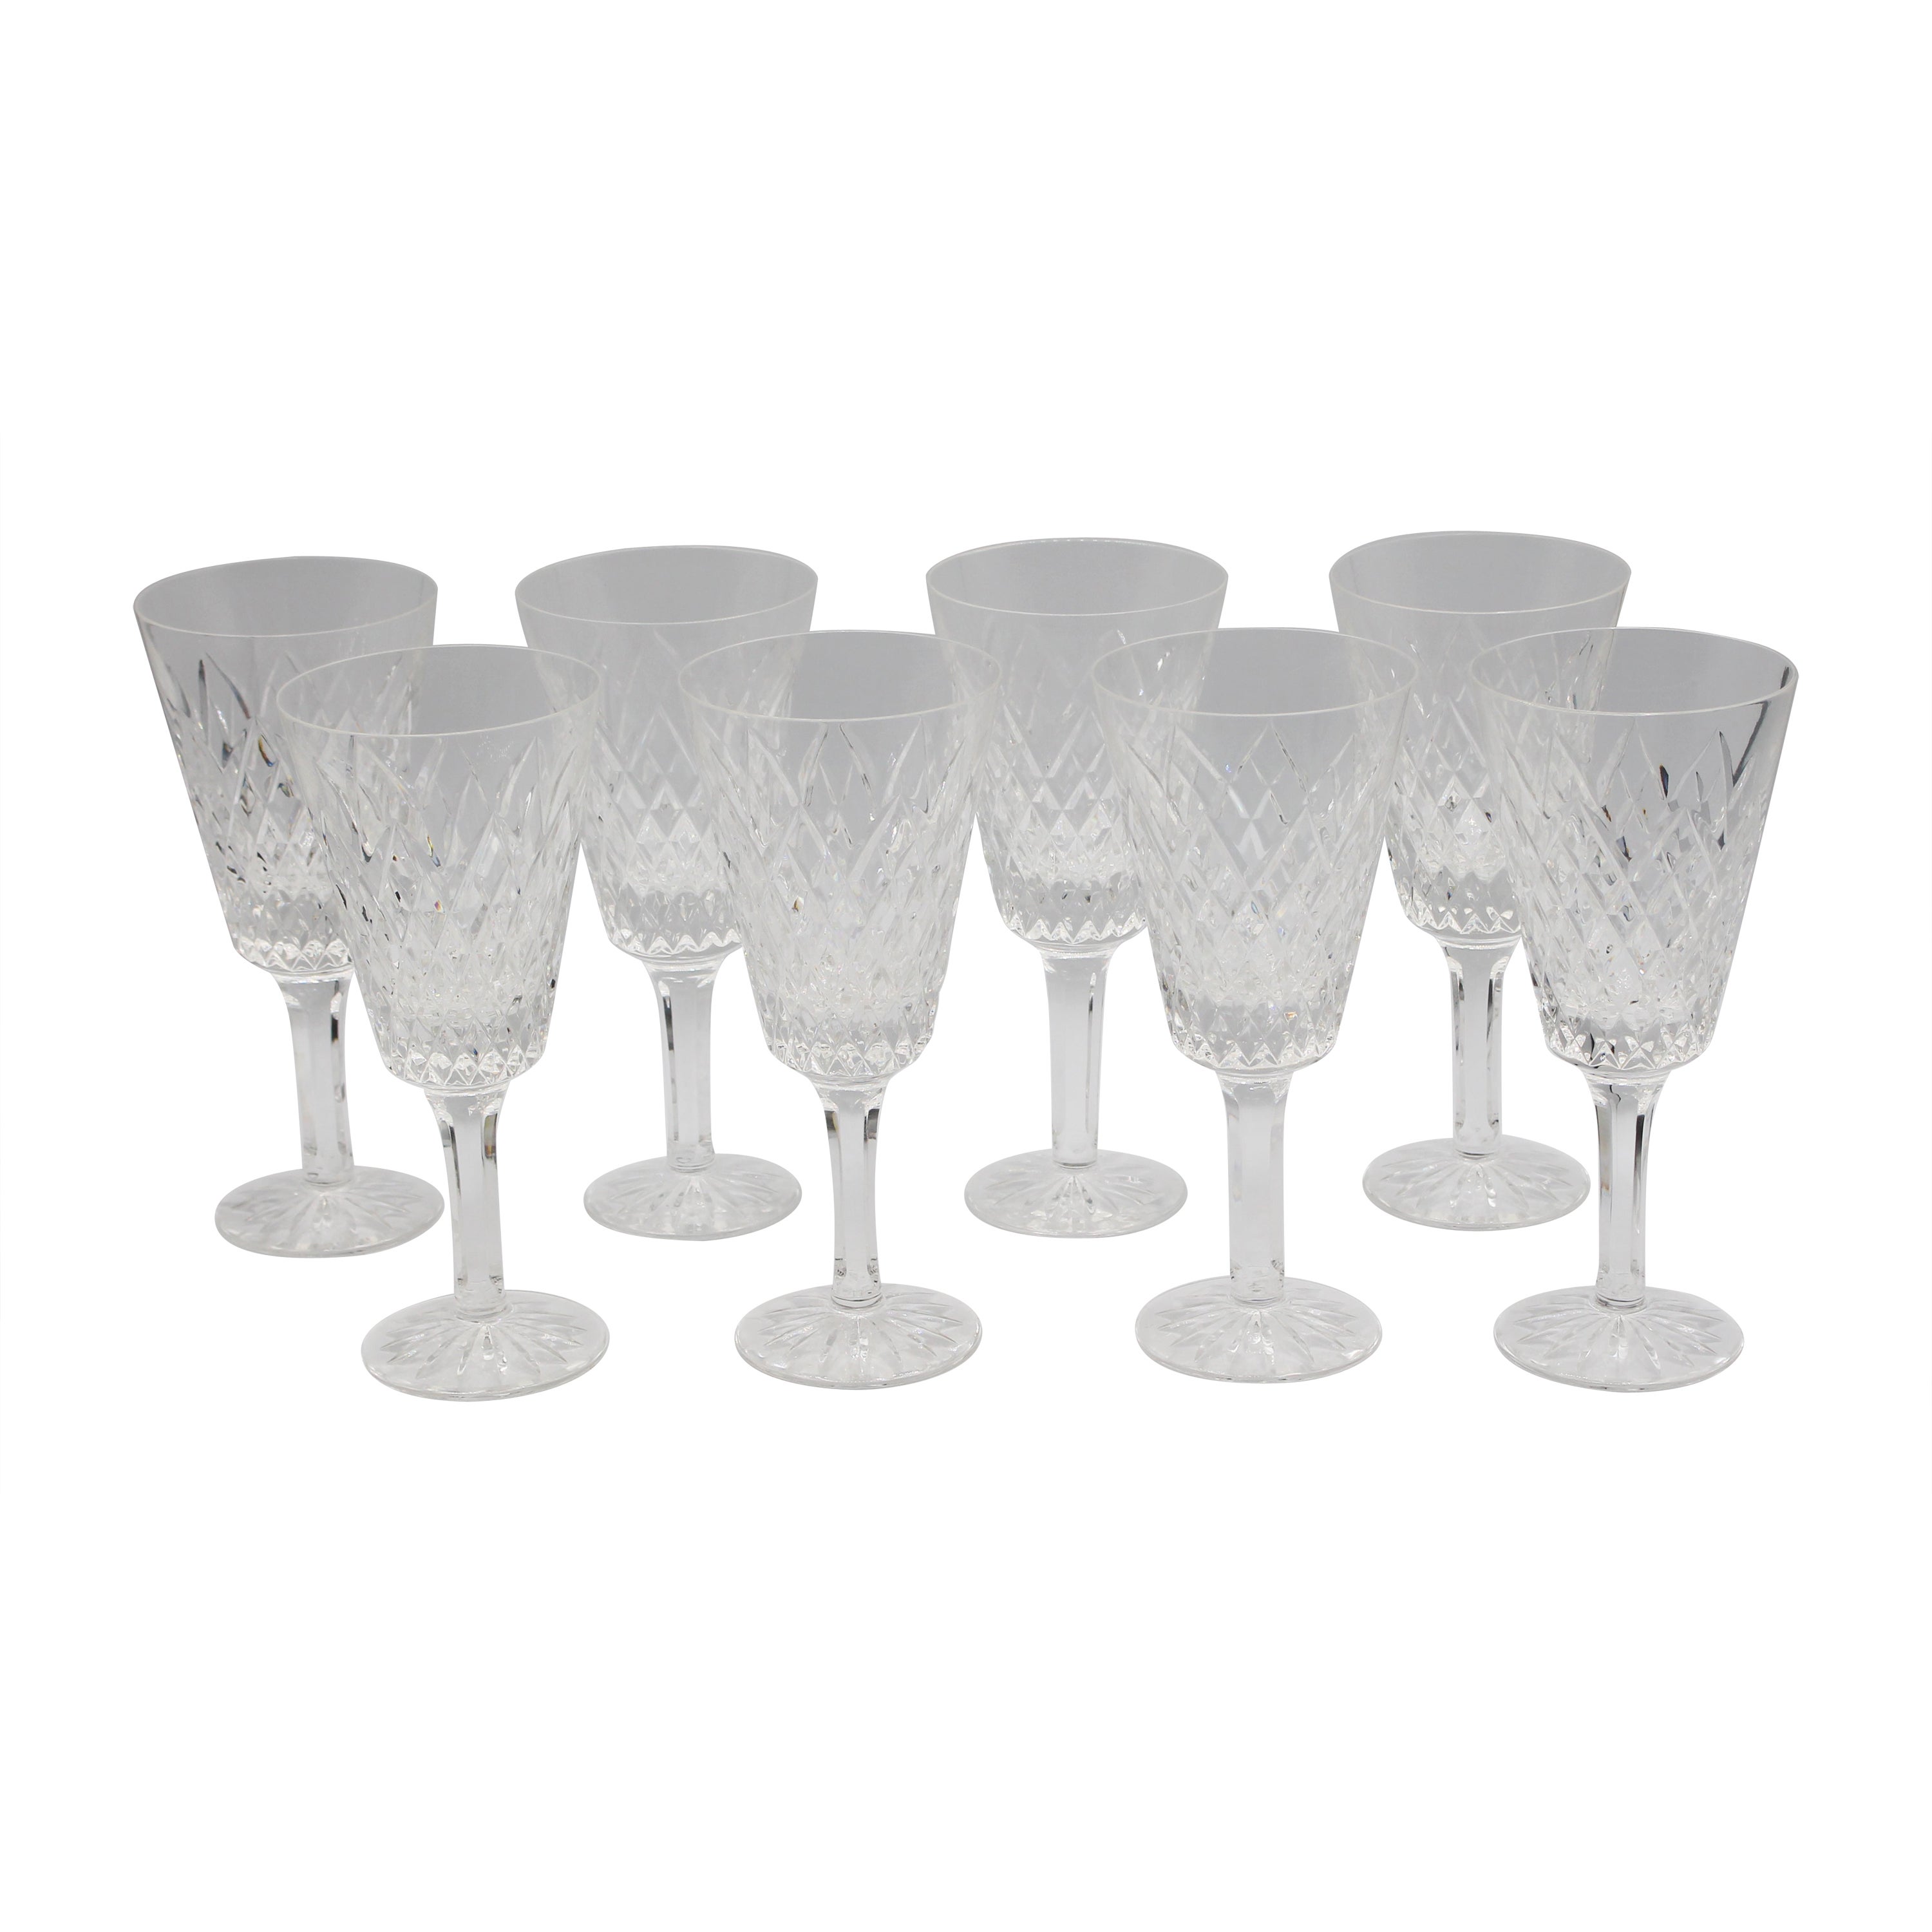 c. 1970s Set of 8 Water Goblets by Tyrone Crystal